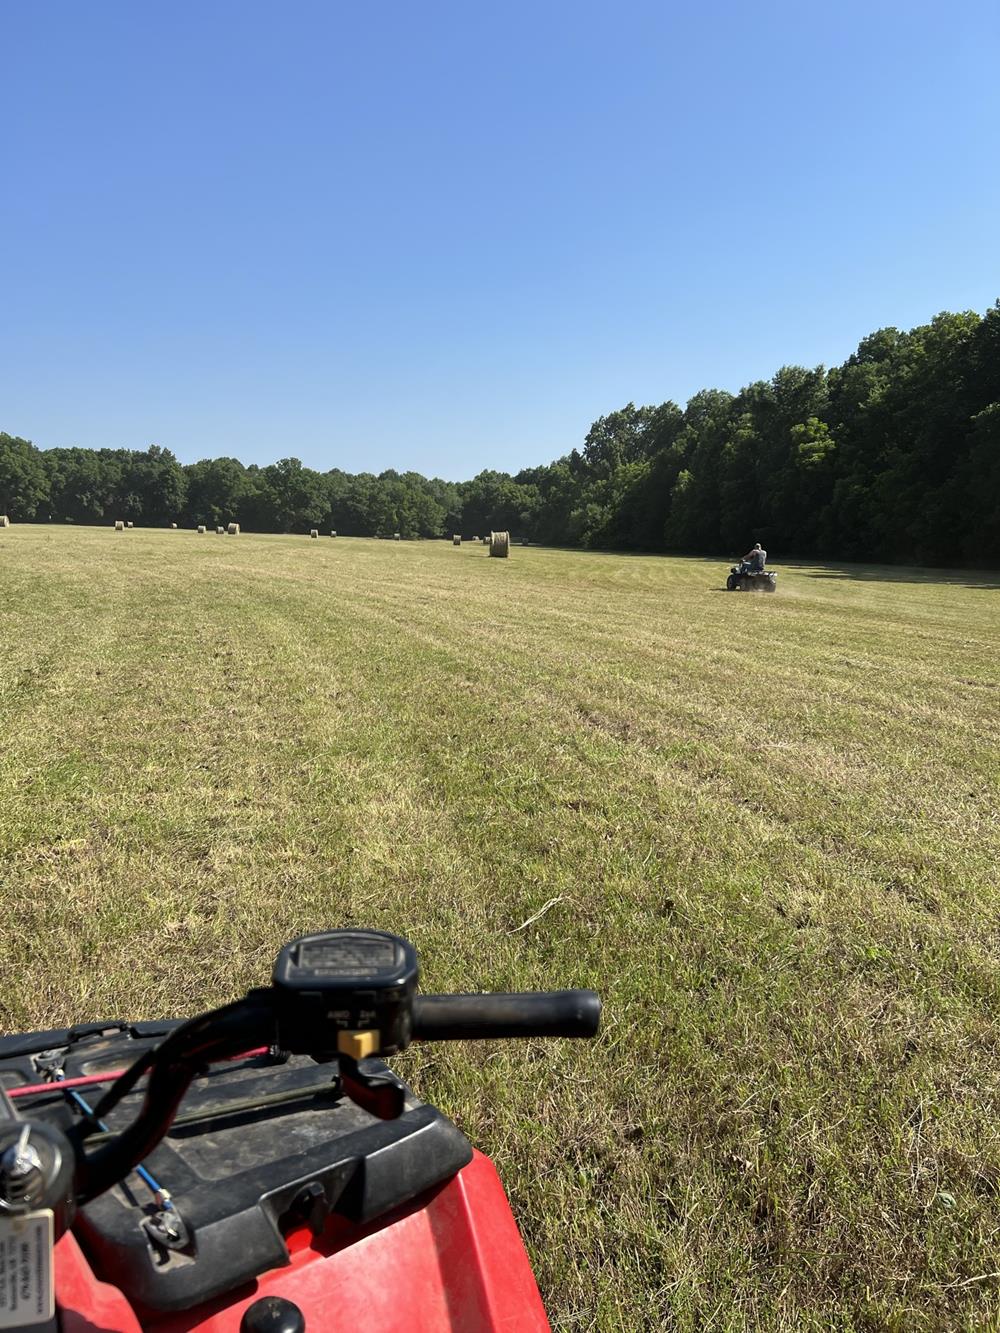 hayfield and four wheeler